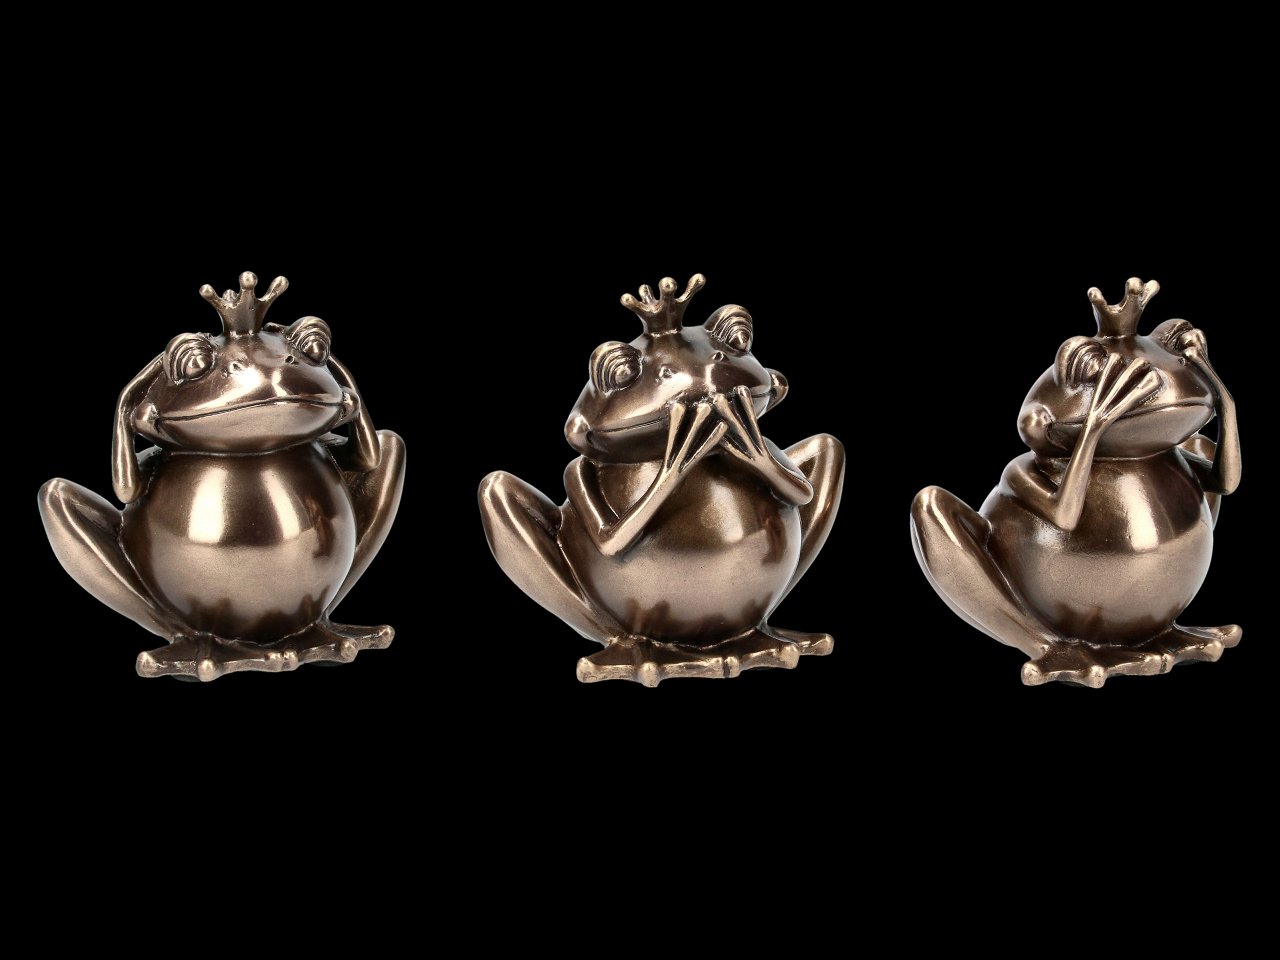 Three Wise Frog Figurines - No Evil